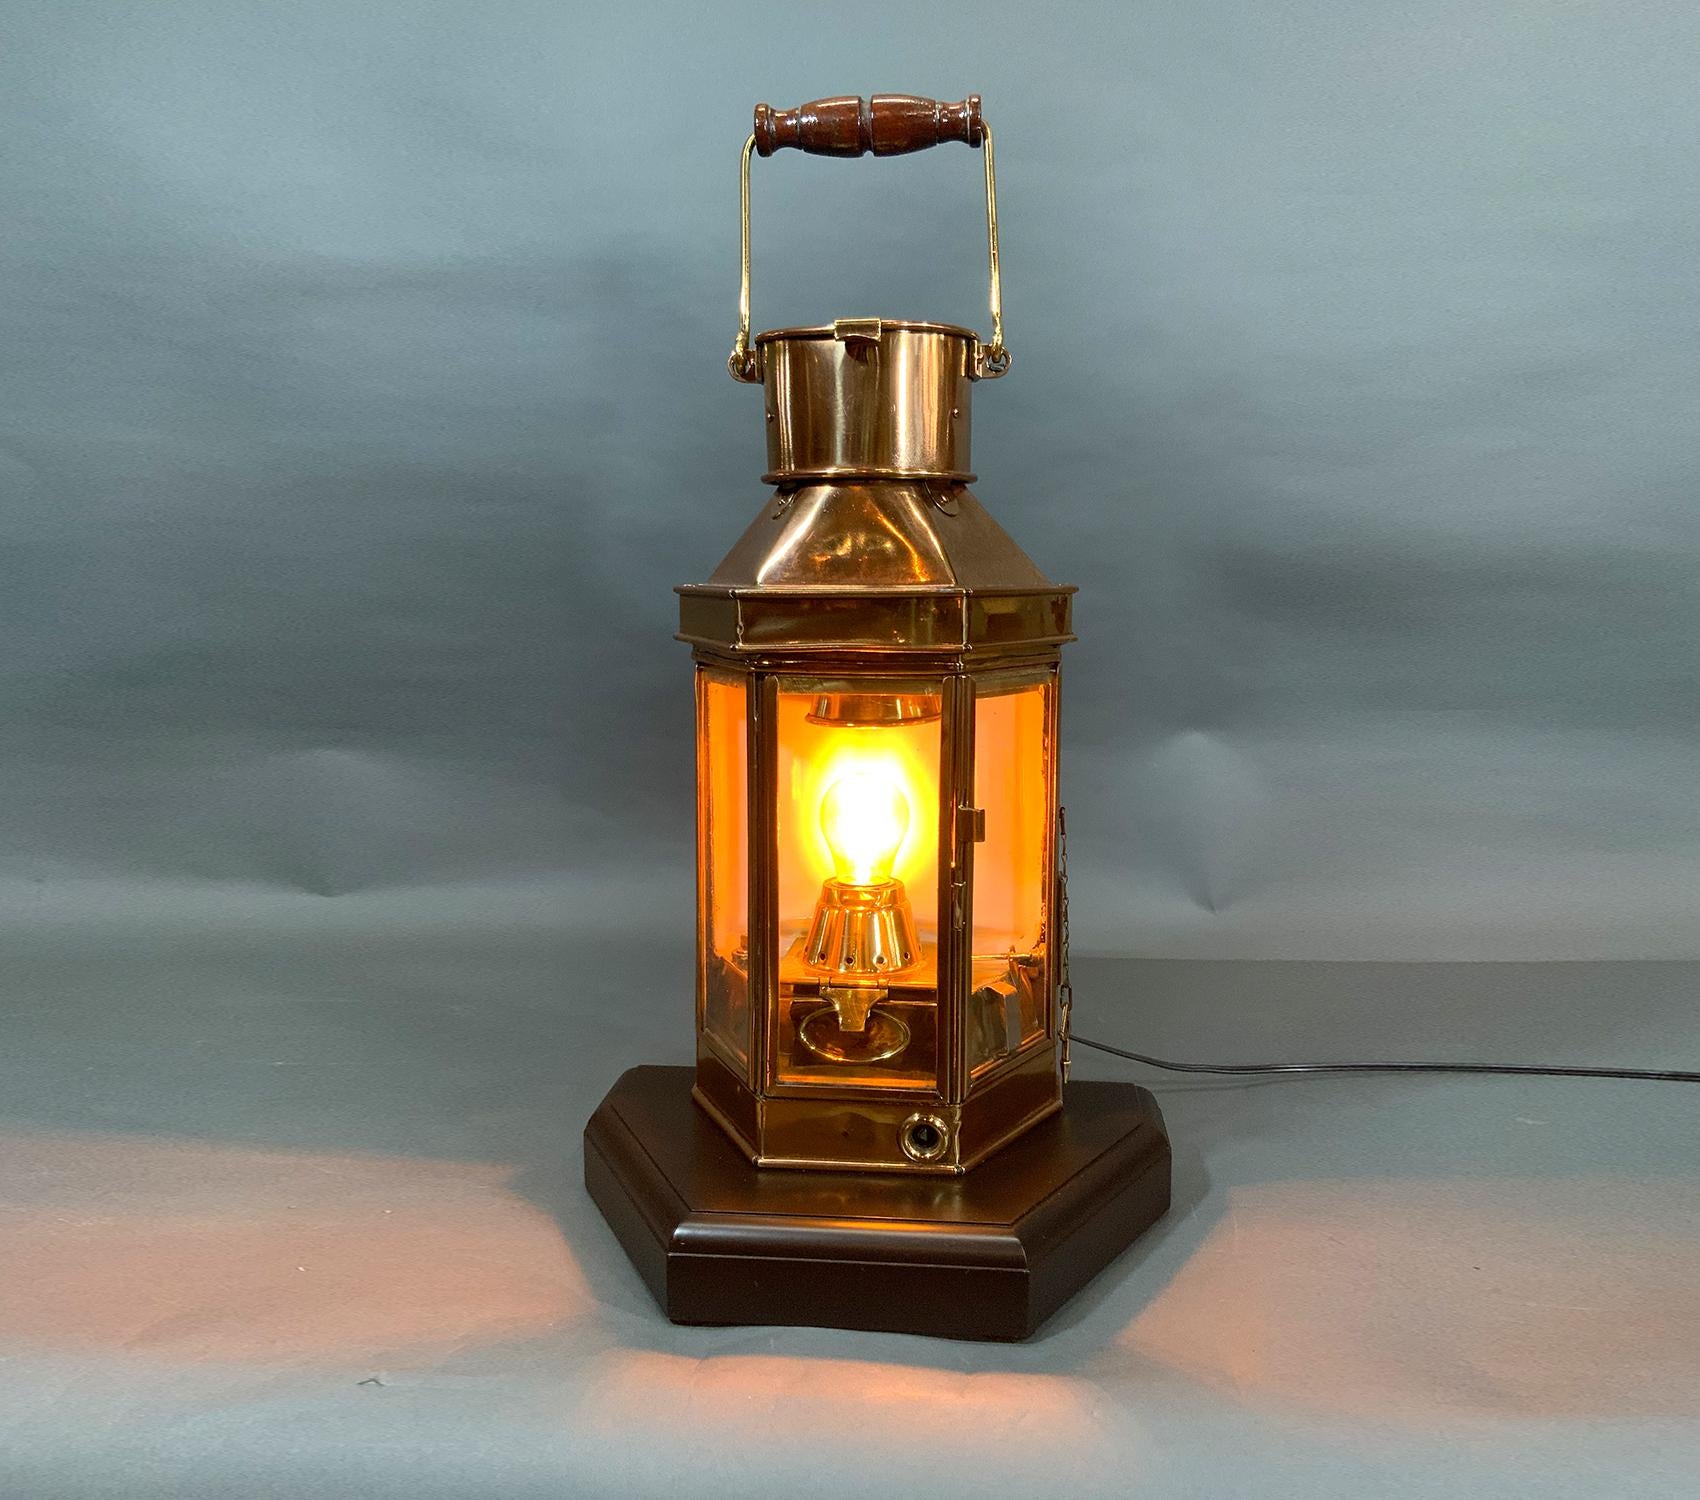 Ships lantern with engraved chimney with makers name Alderson and Co LTD, Birmingham 1941. Case has three glass panels with one hinged. Mounted to a thick mahogany base, carry handle with wood handle. Electric socket fitted to oil socket for home